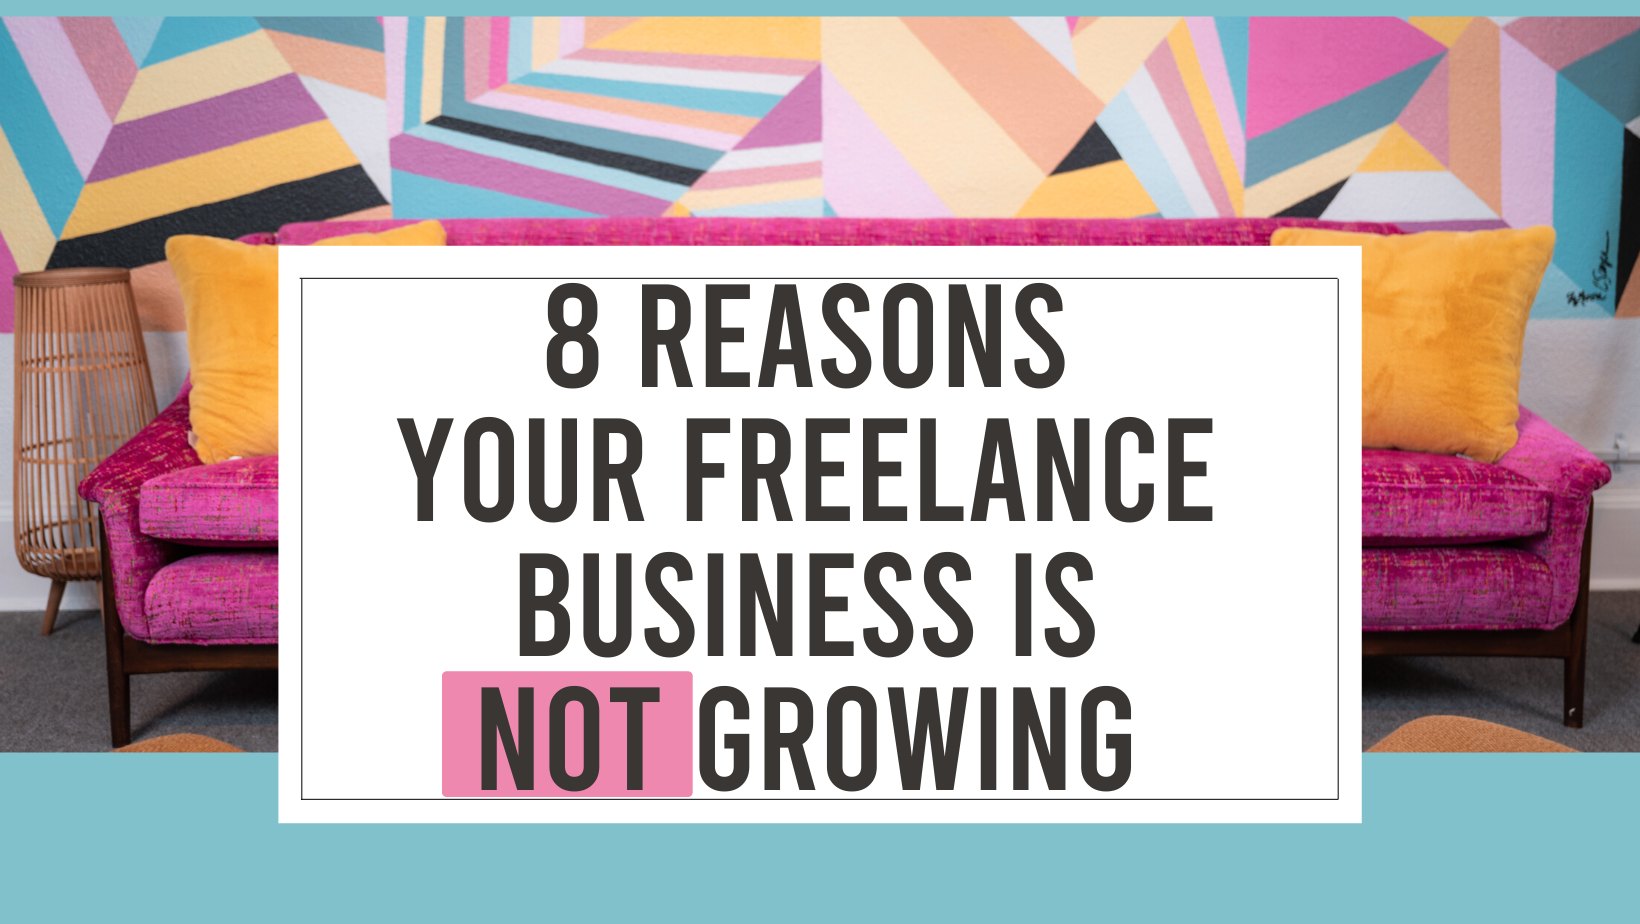 CALLING ALL FREELANCERS: These 8 tips are for YOU